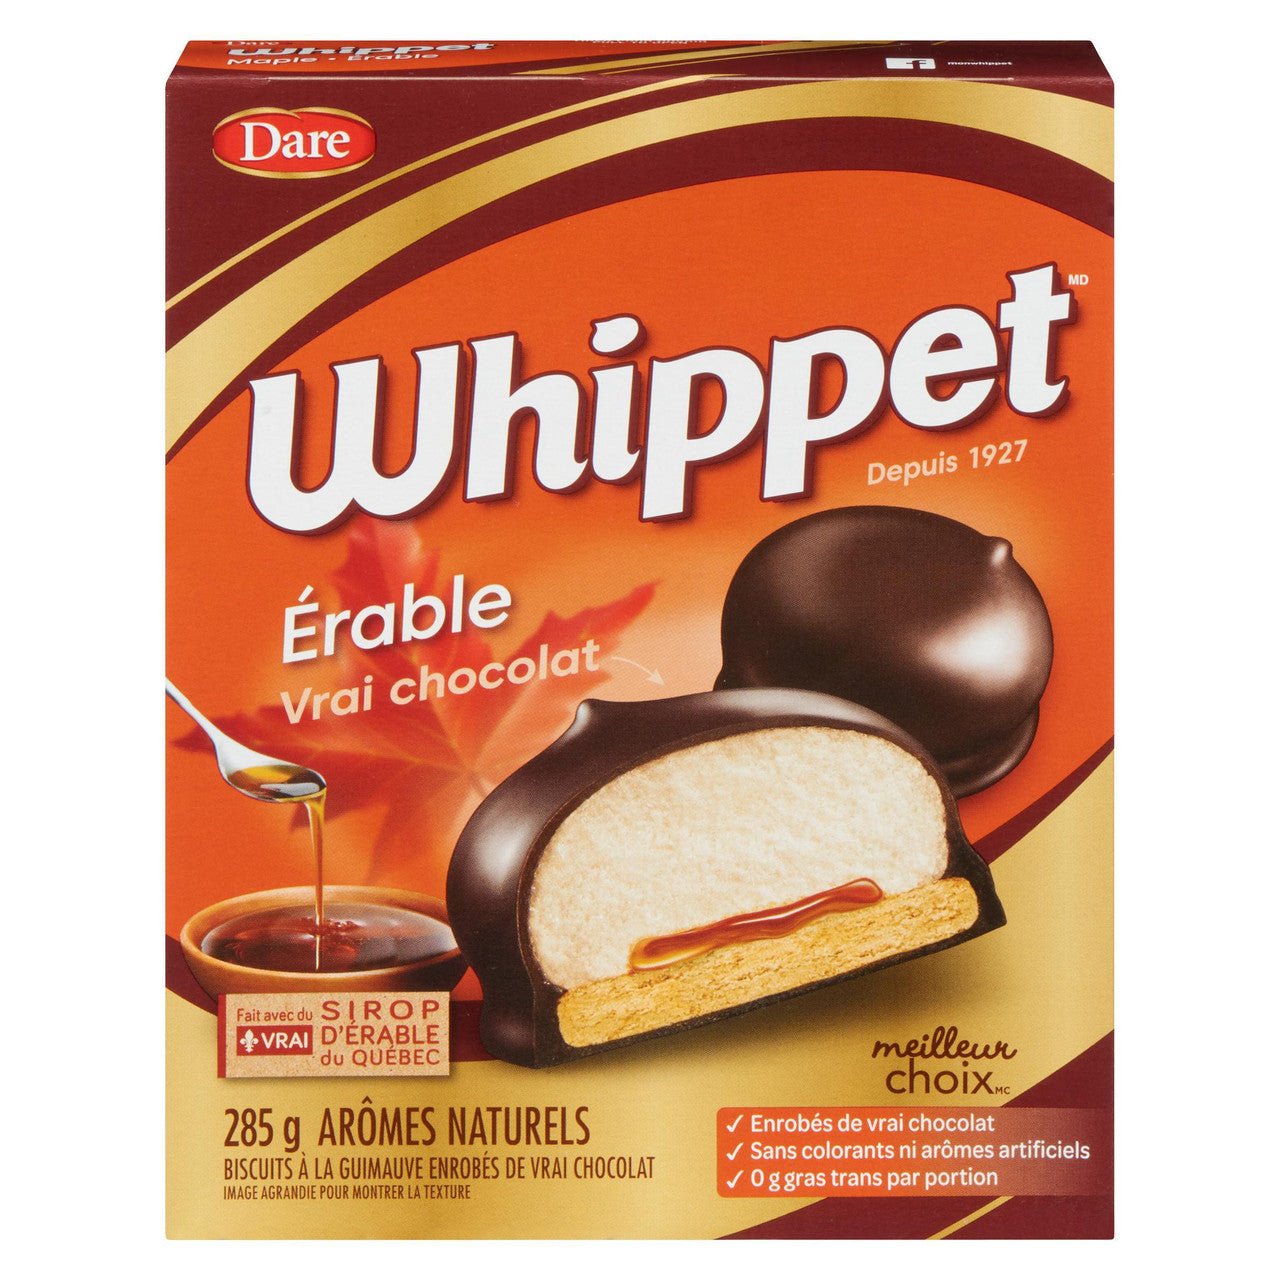 Dare Whippet Marshmallow Maple Cookies, 285g/10 oz., 1 Box, {Imported from Canada}